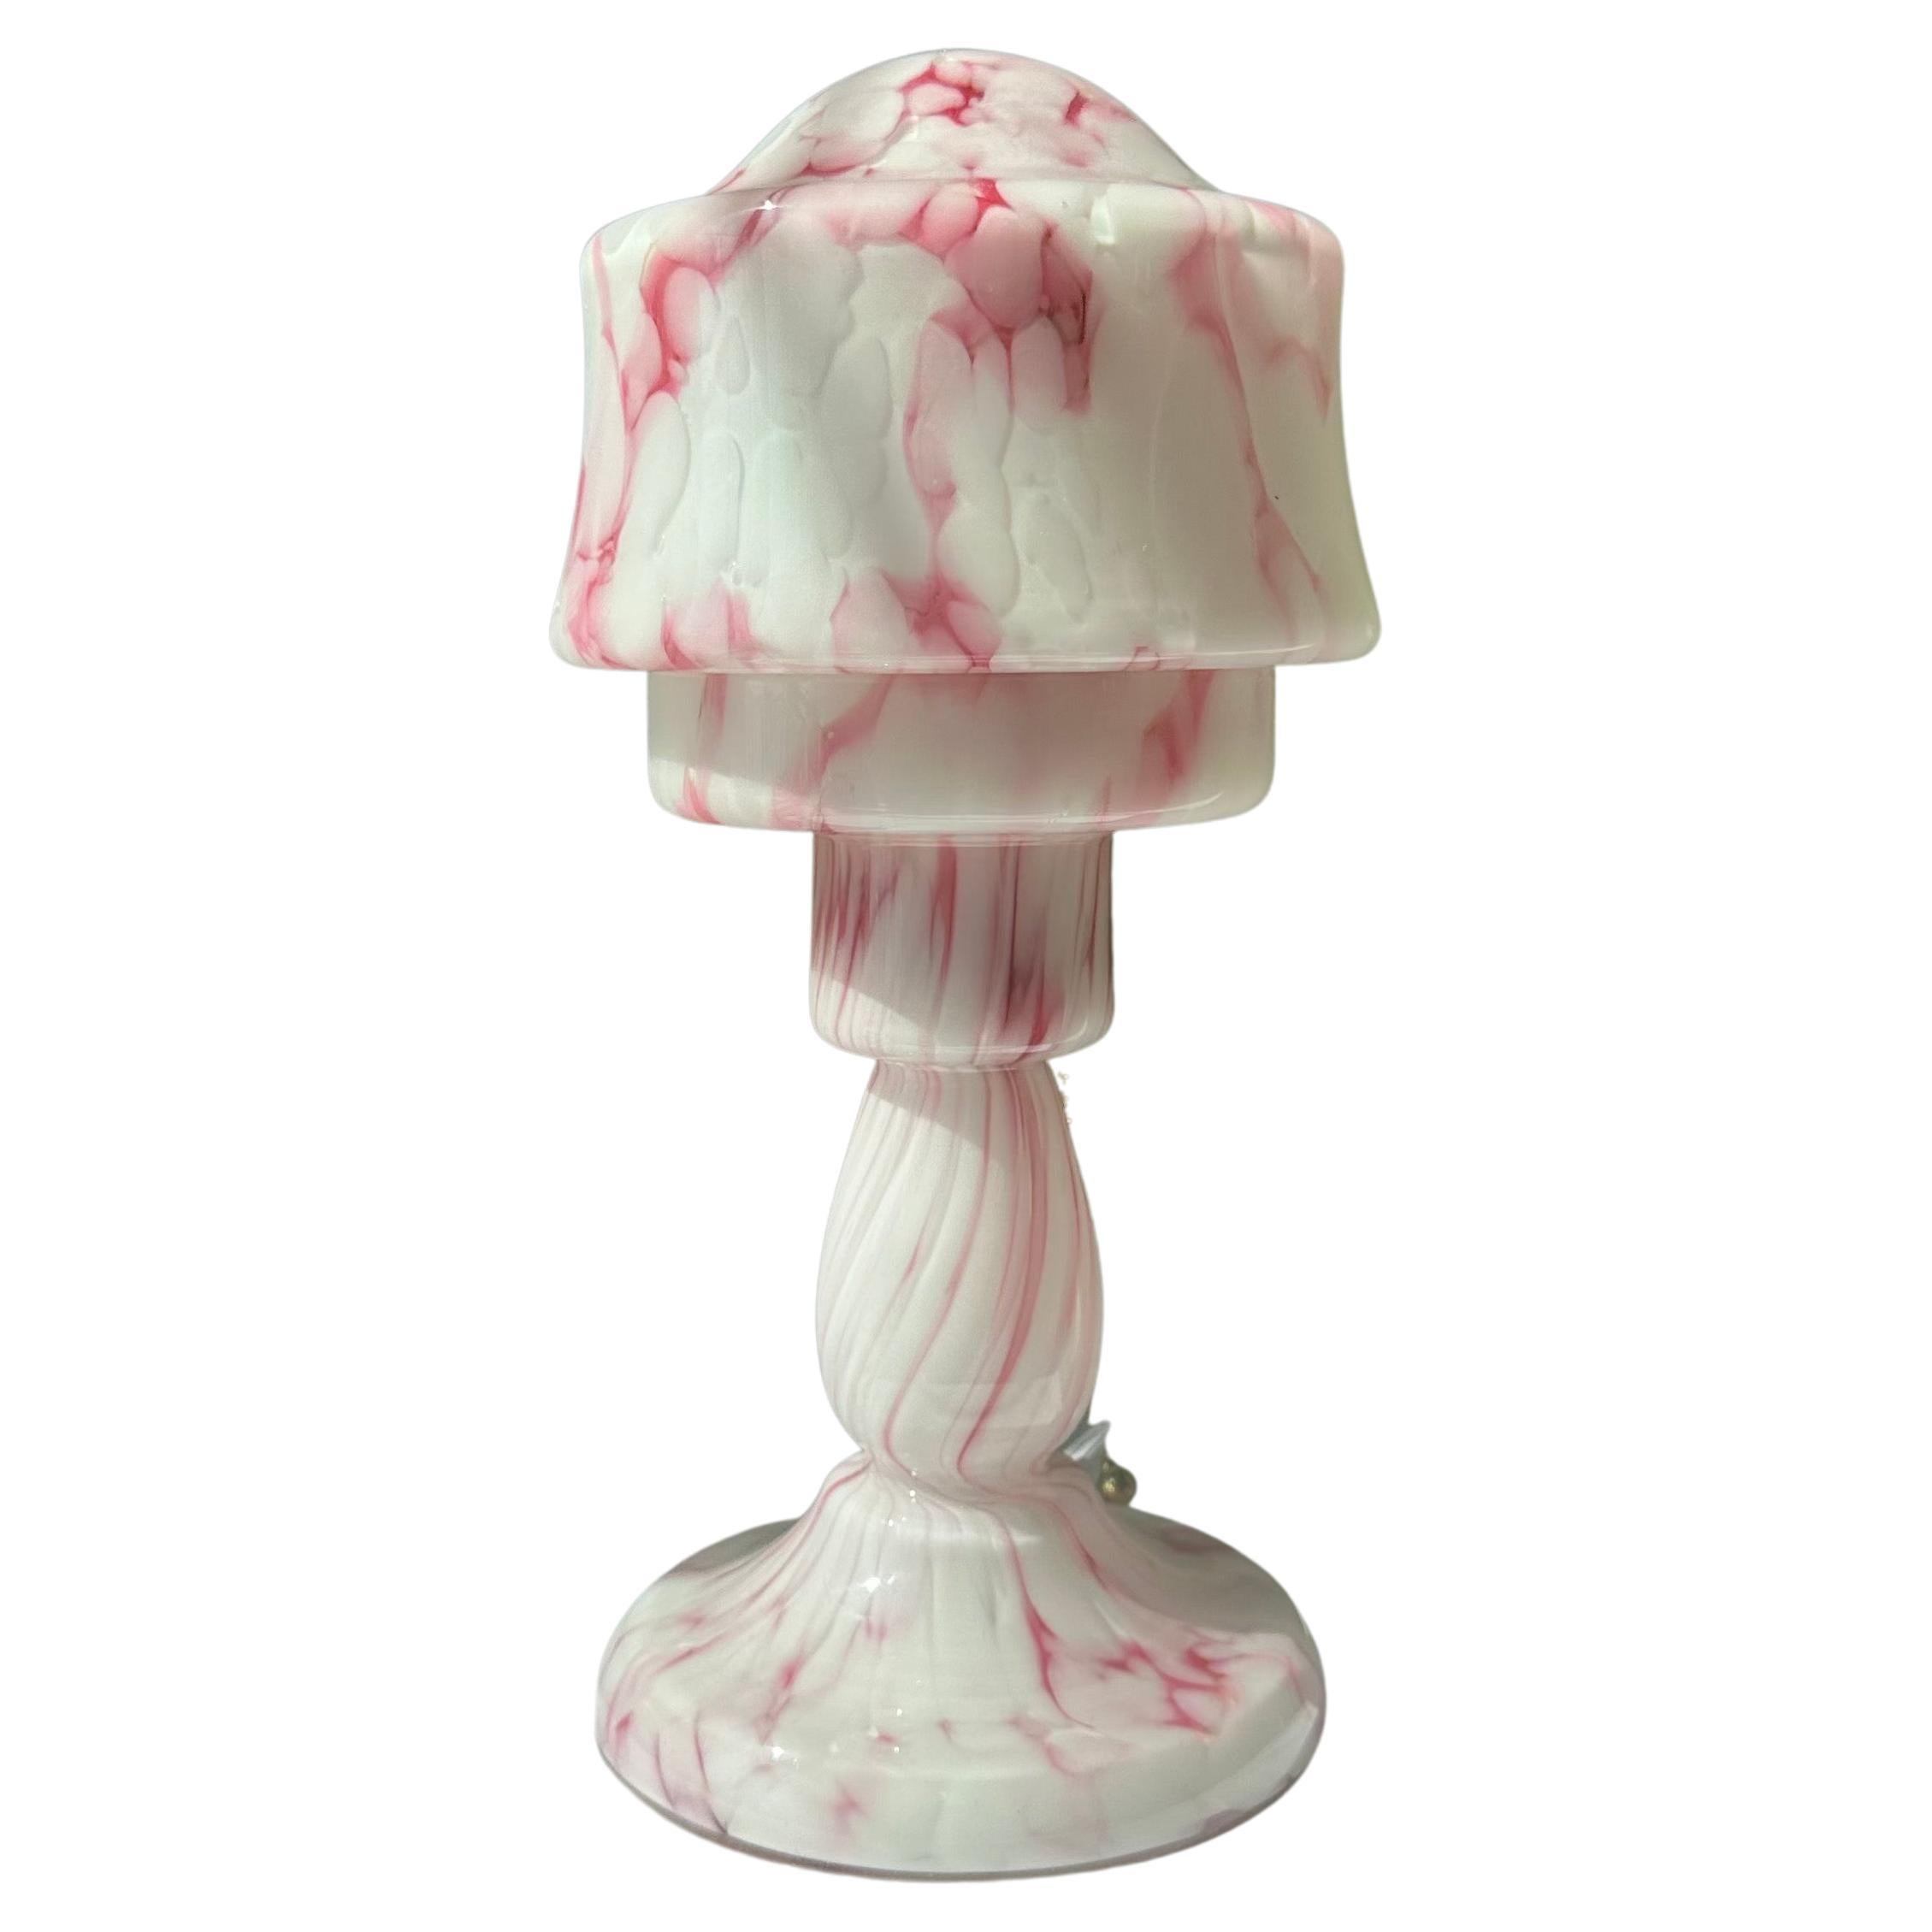 Pink and White Modernist Art Deco Glass Mushroom Table Lamp For Sale